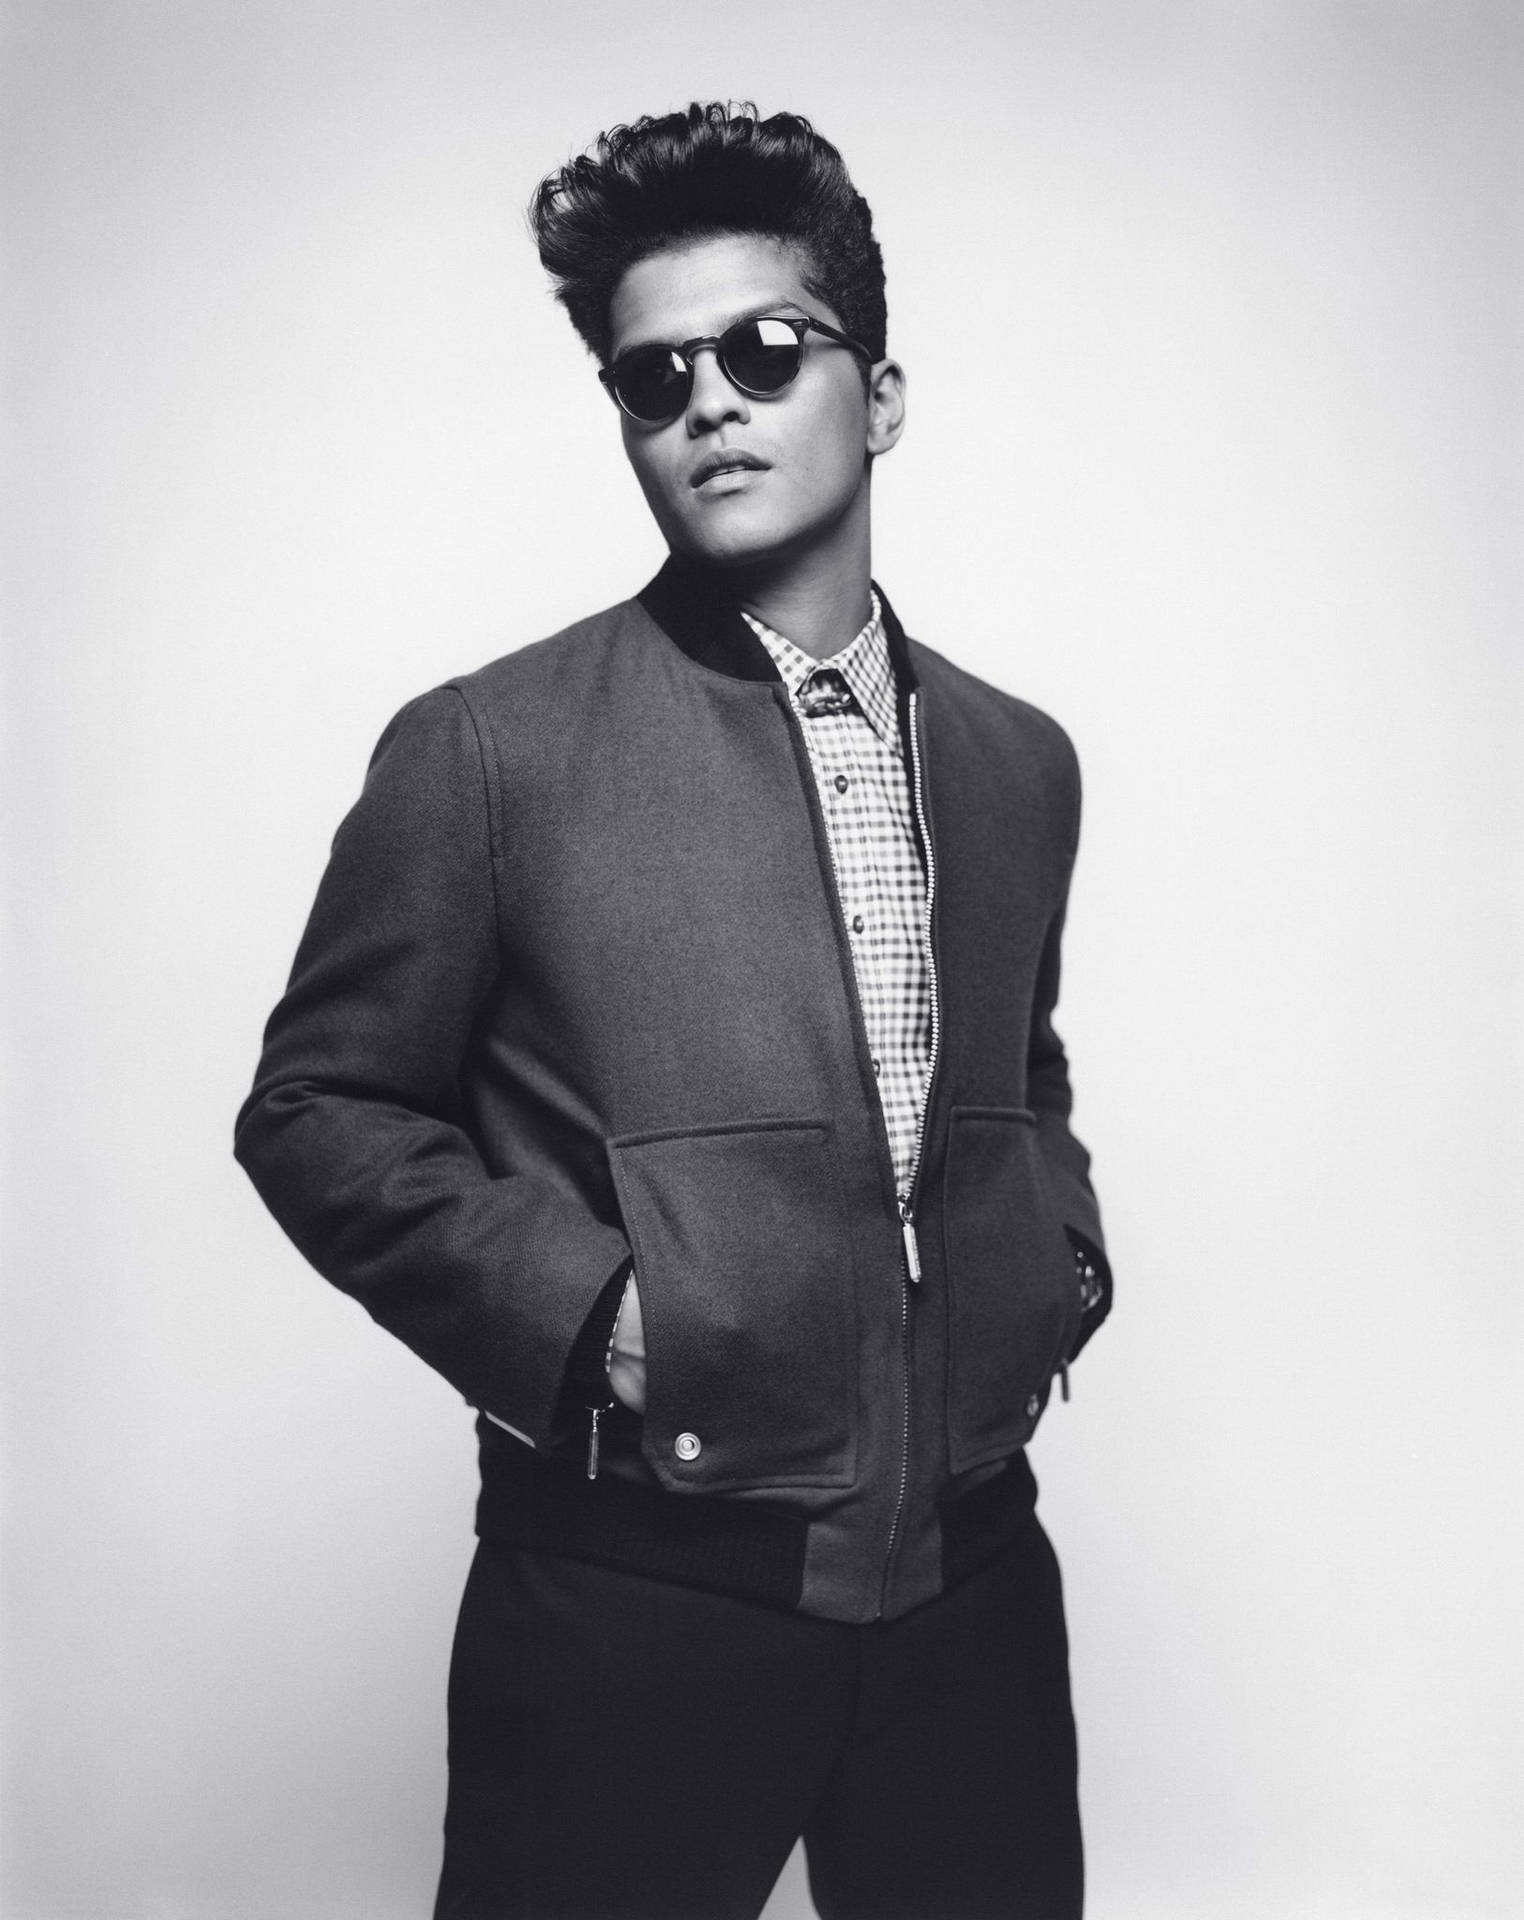 Bruno Mars 1626X2048 Wallpaper and Background Image